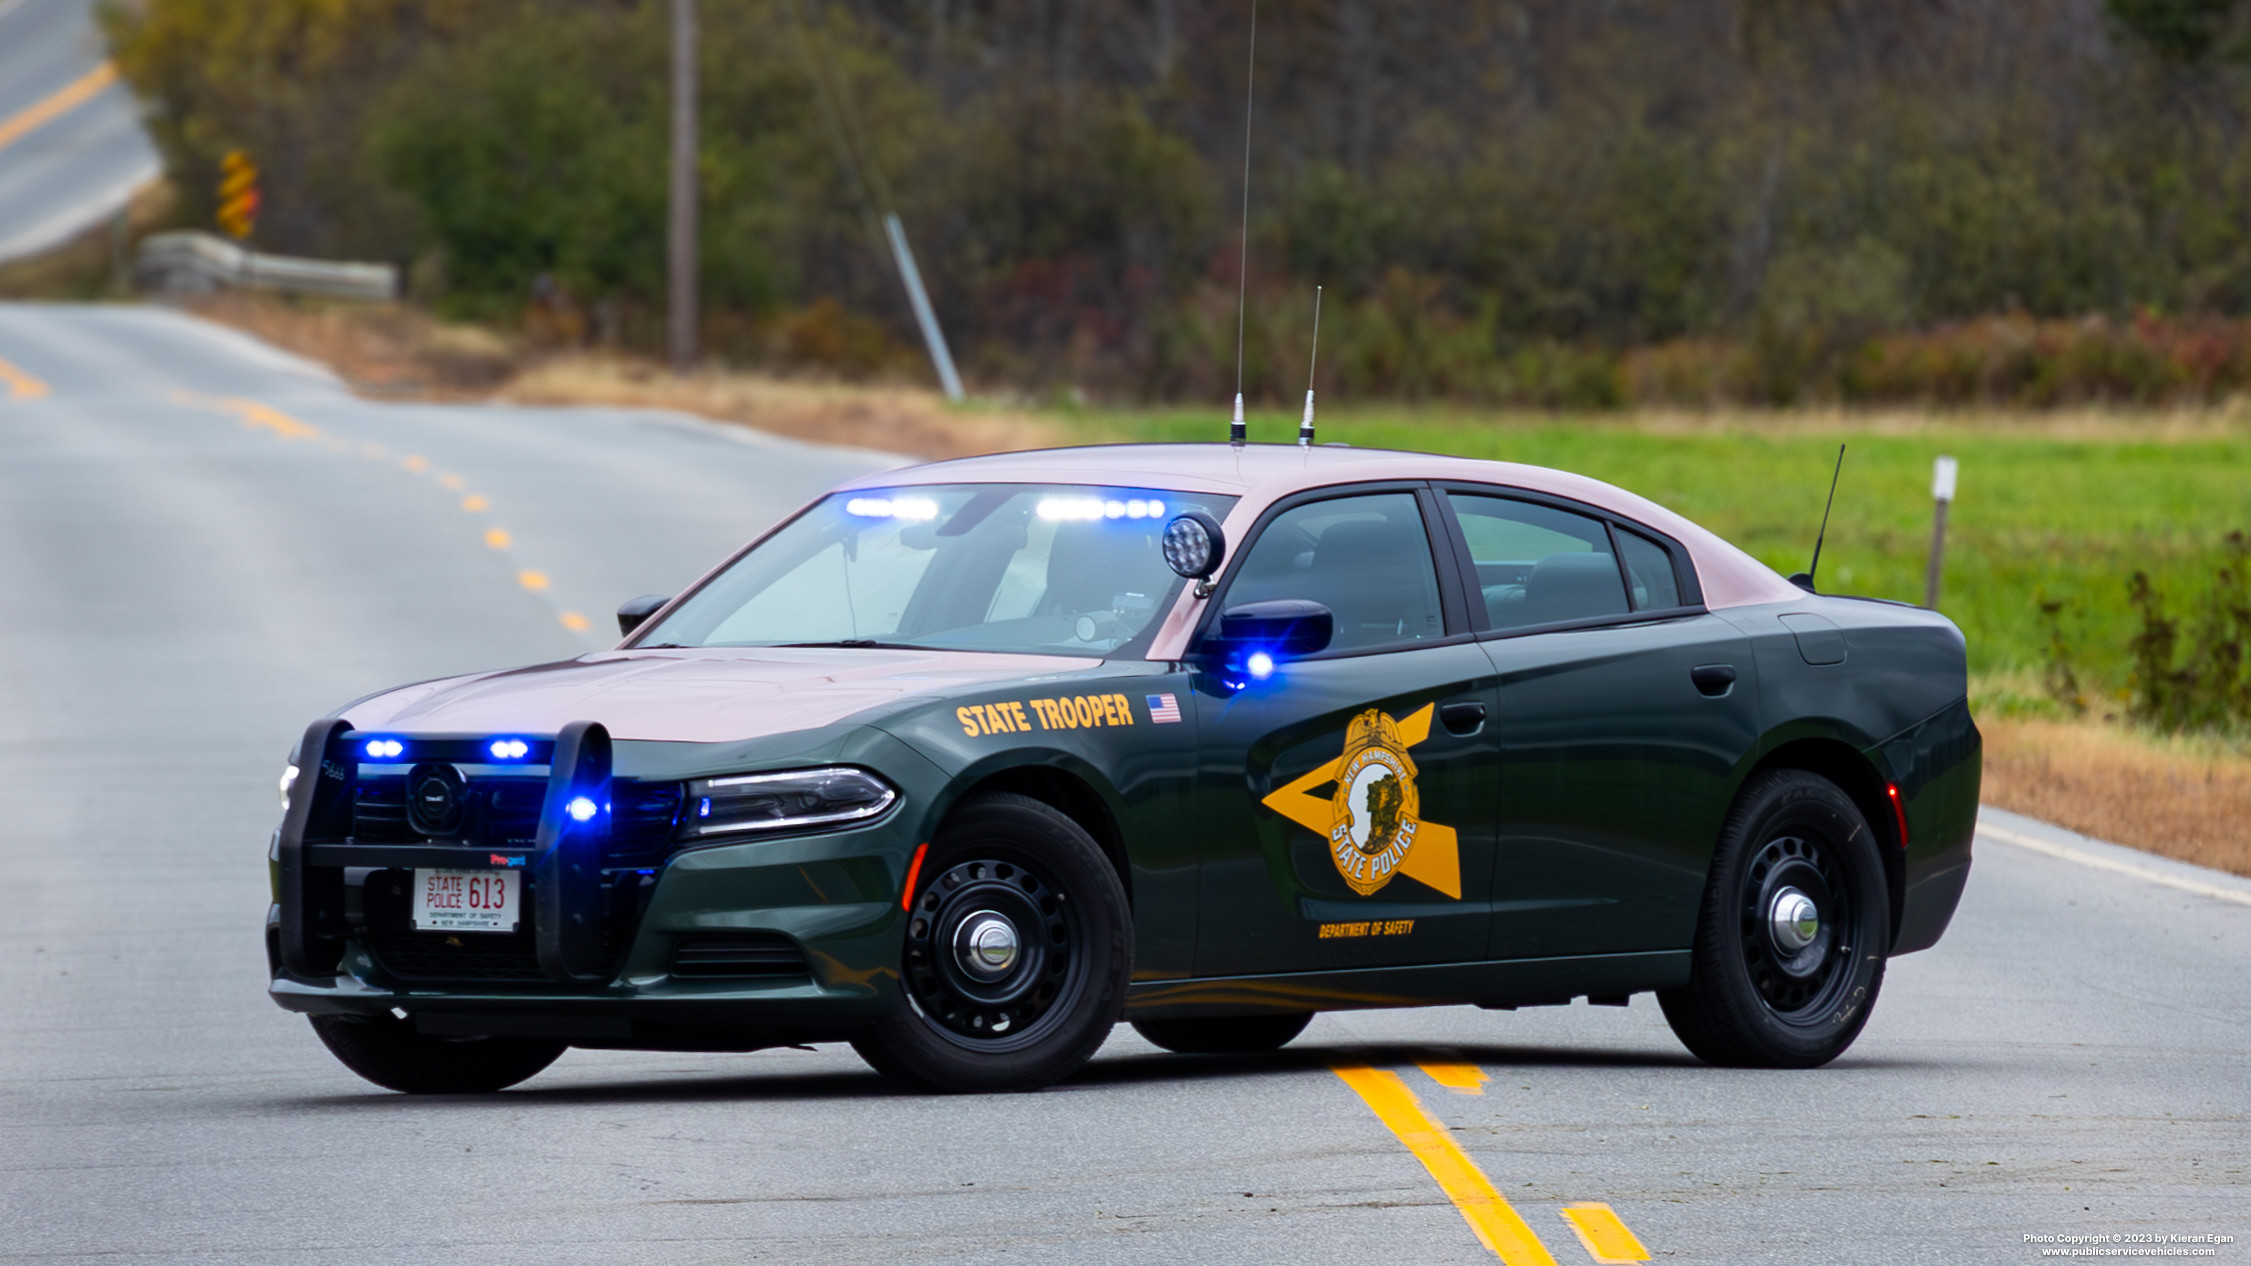 A photo  of New Hampshire State Police
            Cruiser 613, a 2022 Dodge Charger             taken by Kieran Egan